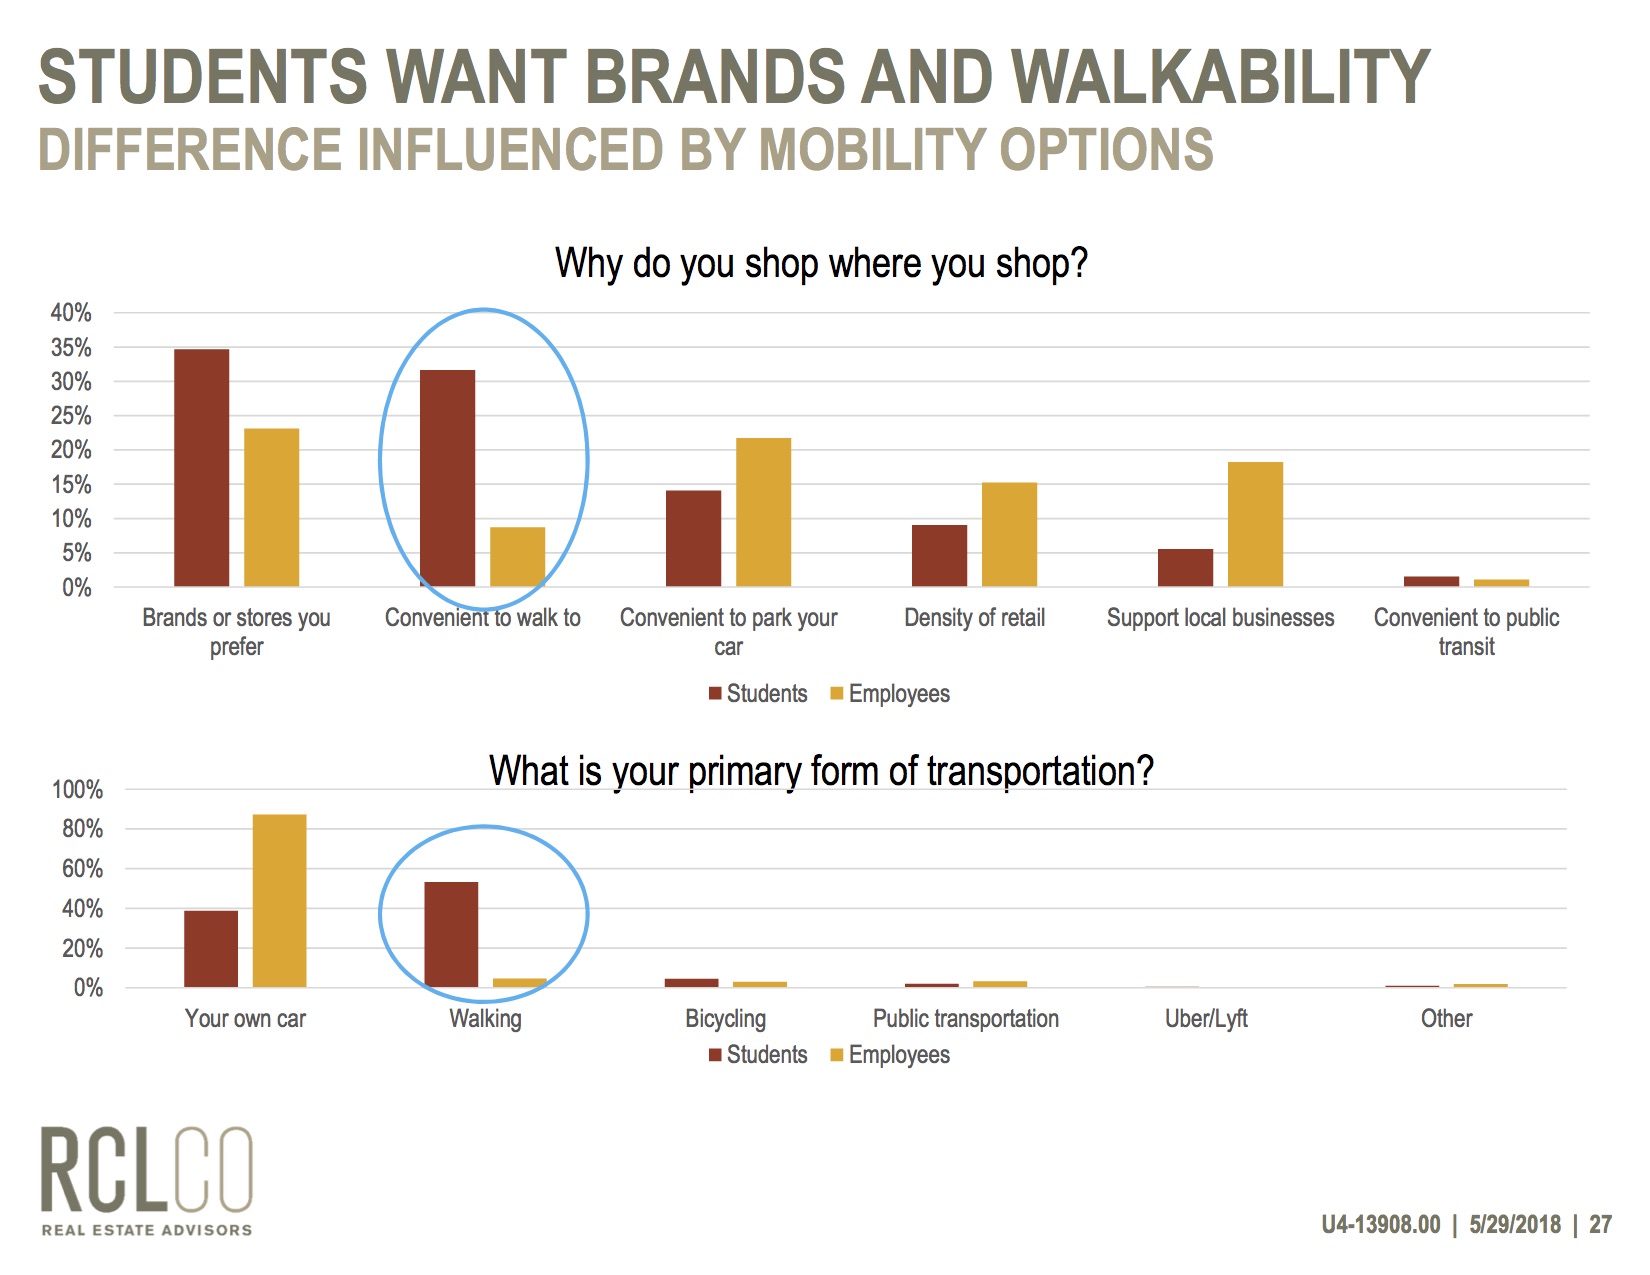 From retail study, students want brands and walkability